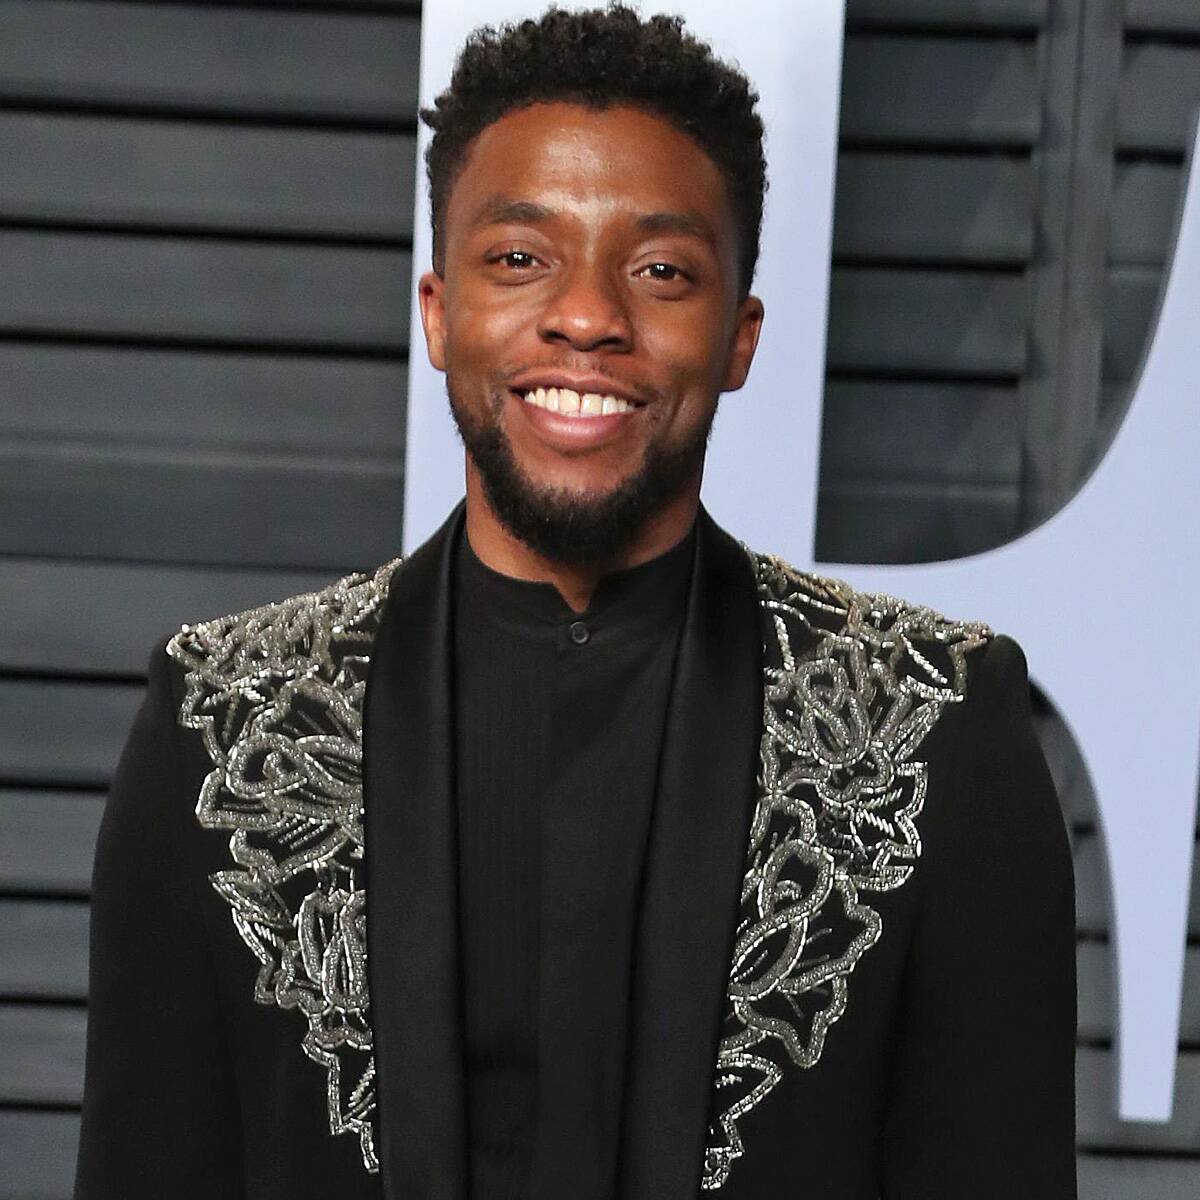 Chadwick Boseman Spent Time With Young Cancer Patients as He Battled His Gain Illness